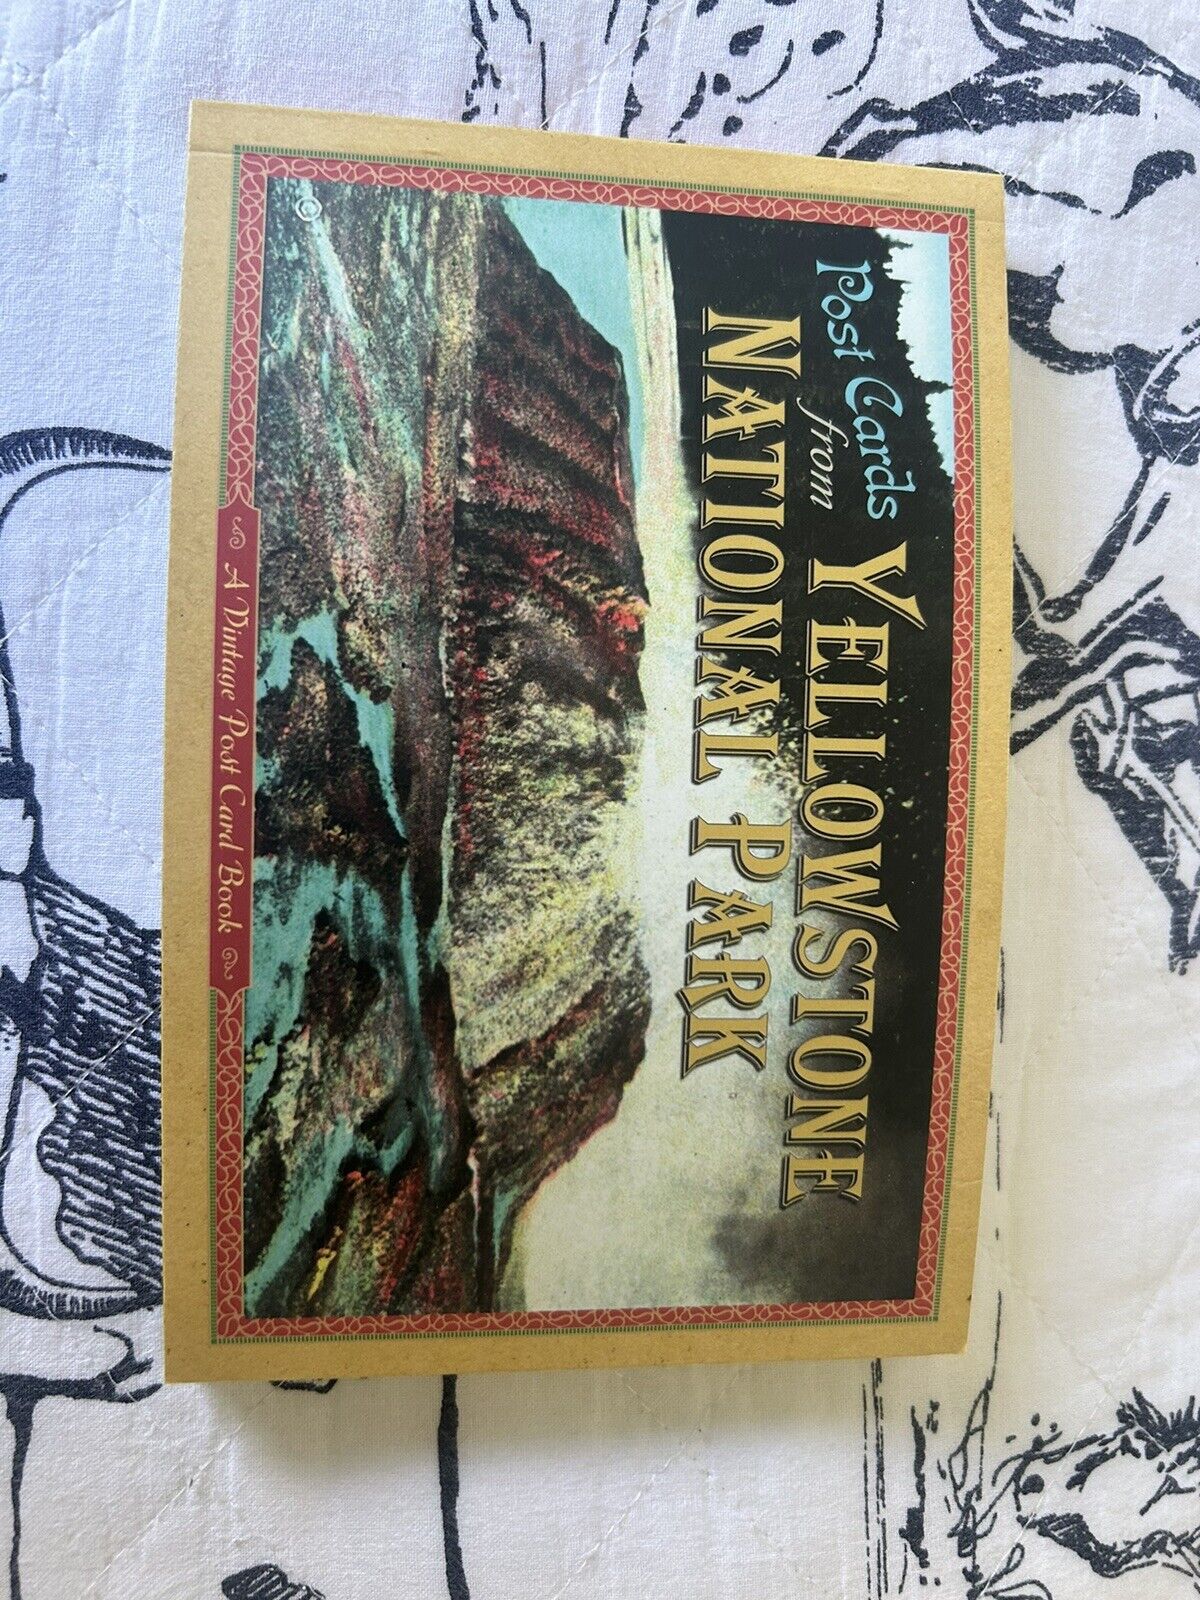 Vintage Yellowstone postcard book (23 Cards Included)